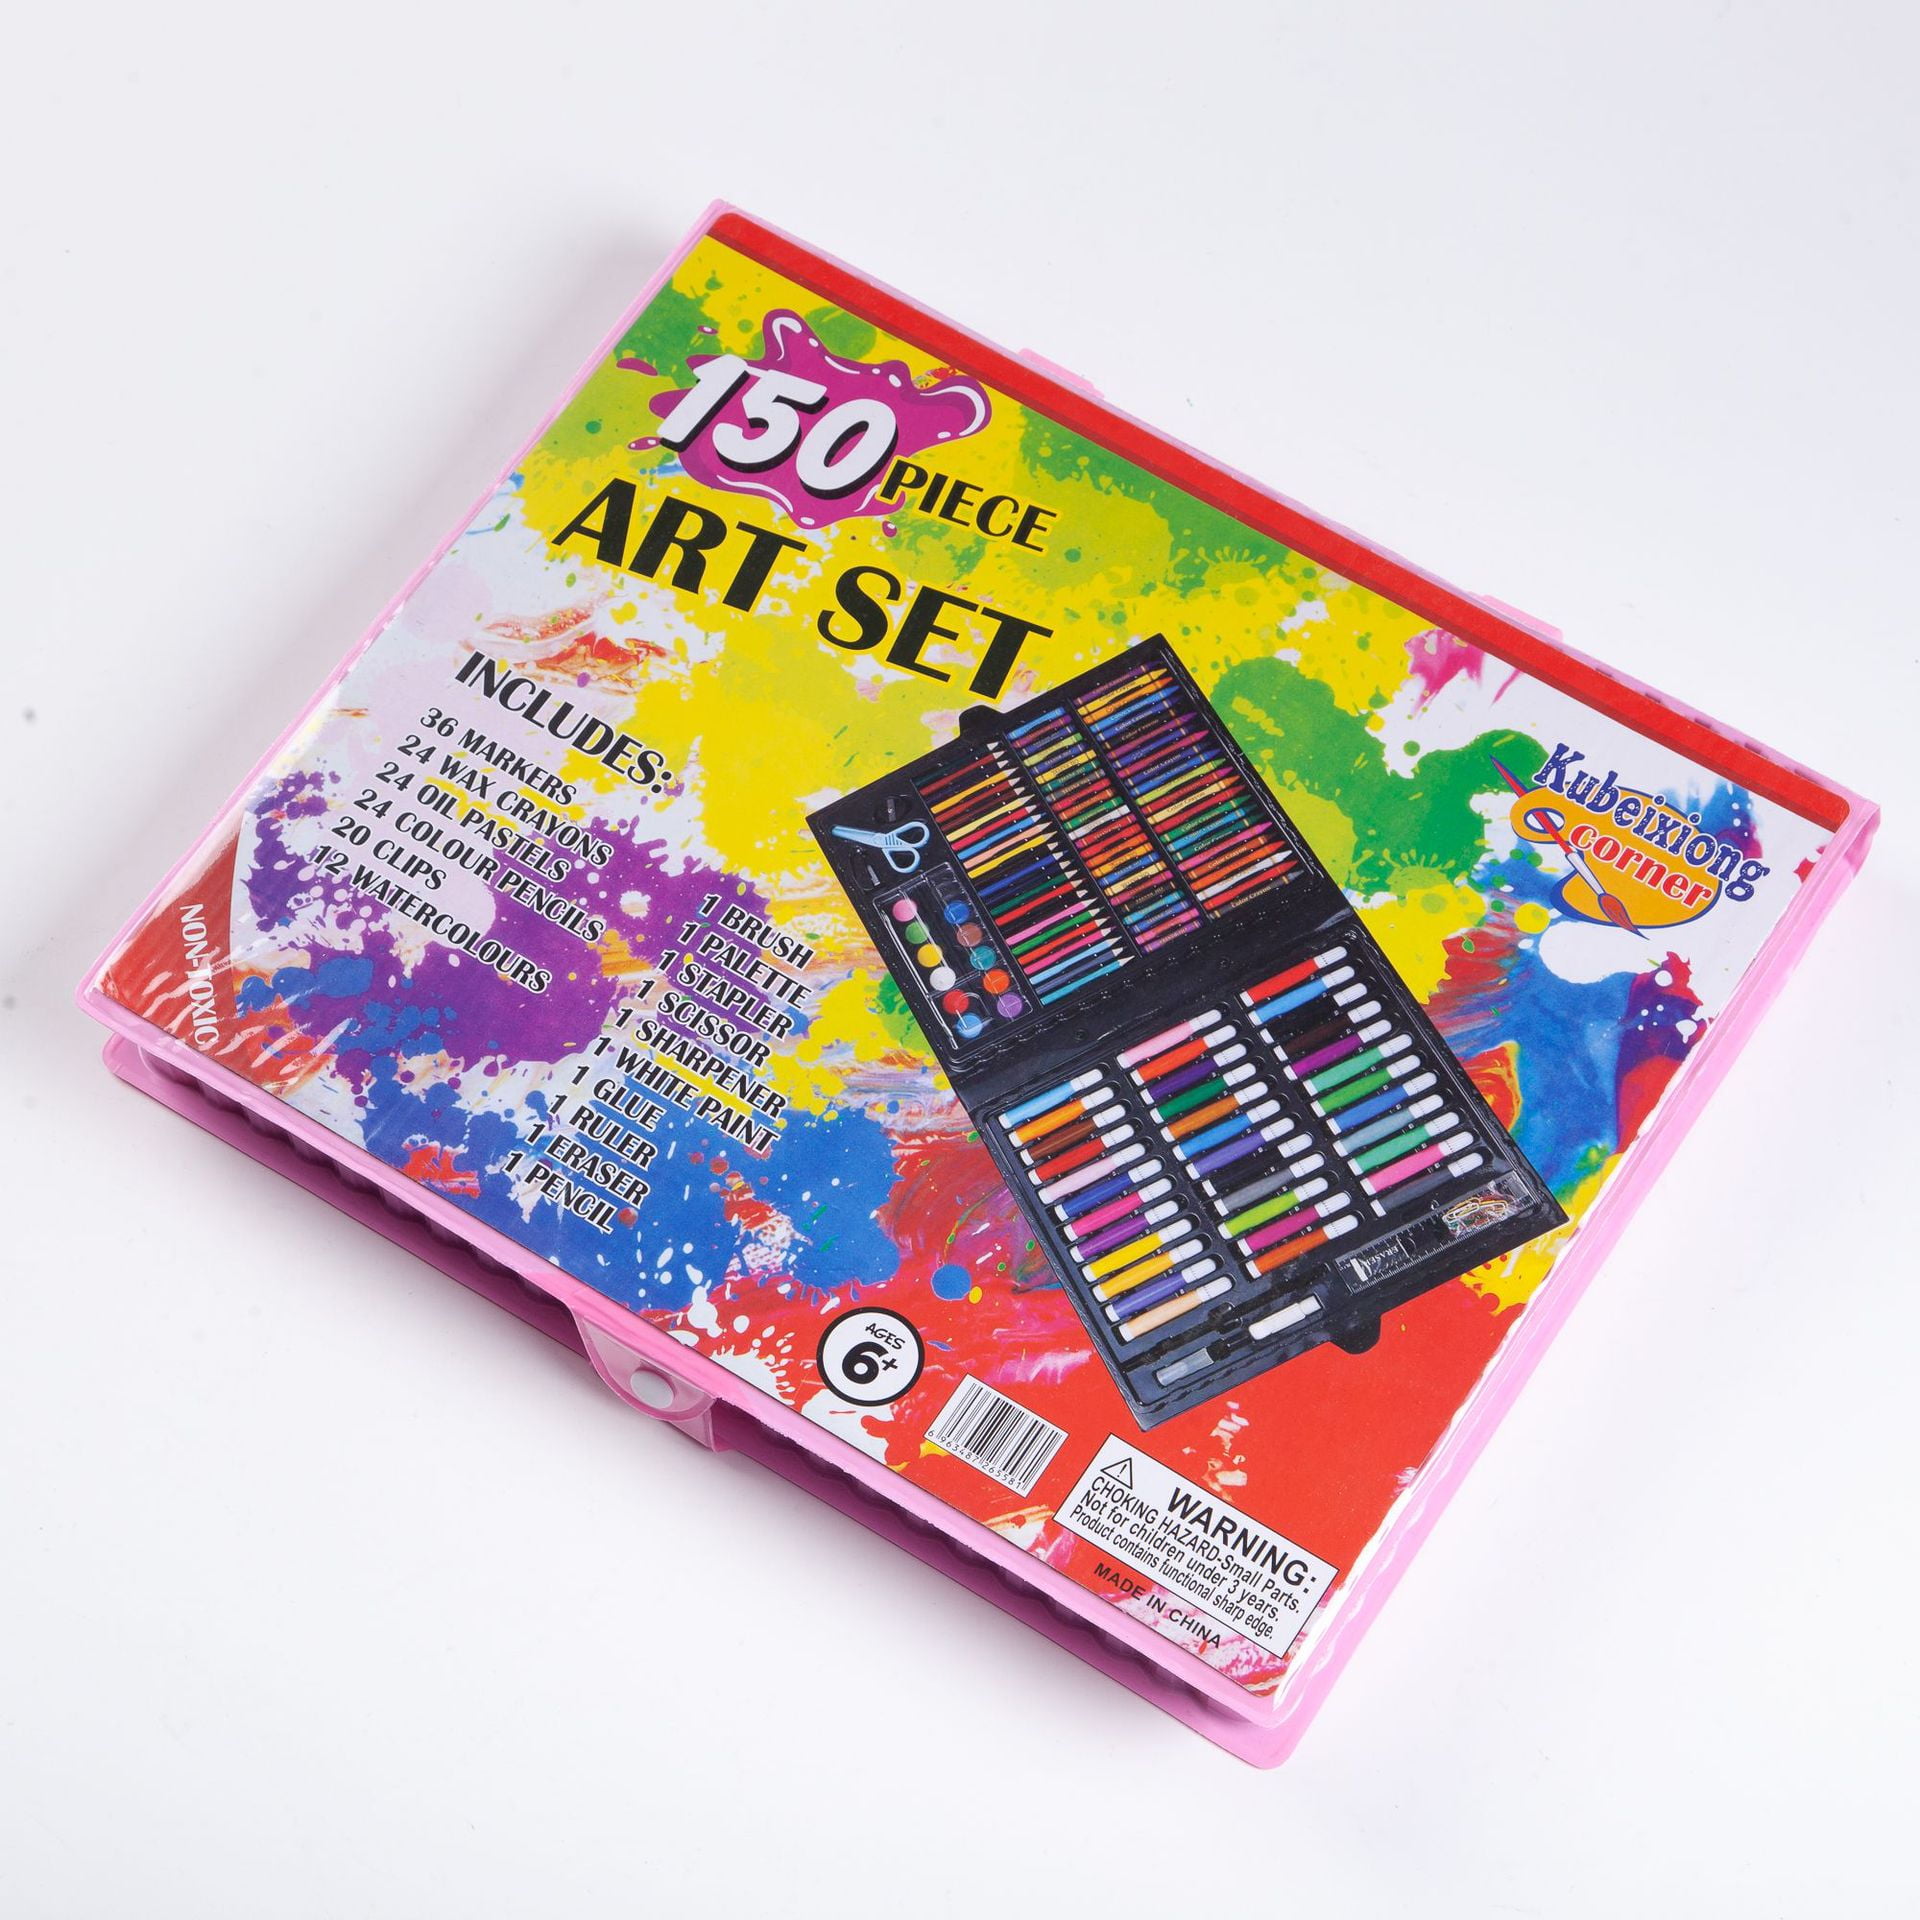 NEW 150-Pack Deluxe Wooden Art Supplies Set; Crafts, Drawing, Painting Kits,  1 Sketch Pad; for All Artists, Beginners, Teens/Kids; Pink Or Mint Green  for Sale in San Antonio, TX - OfferUp